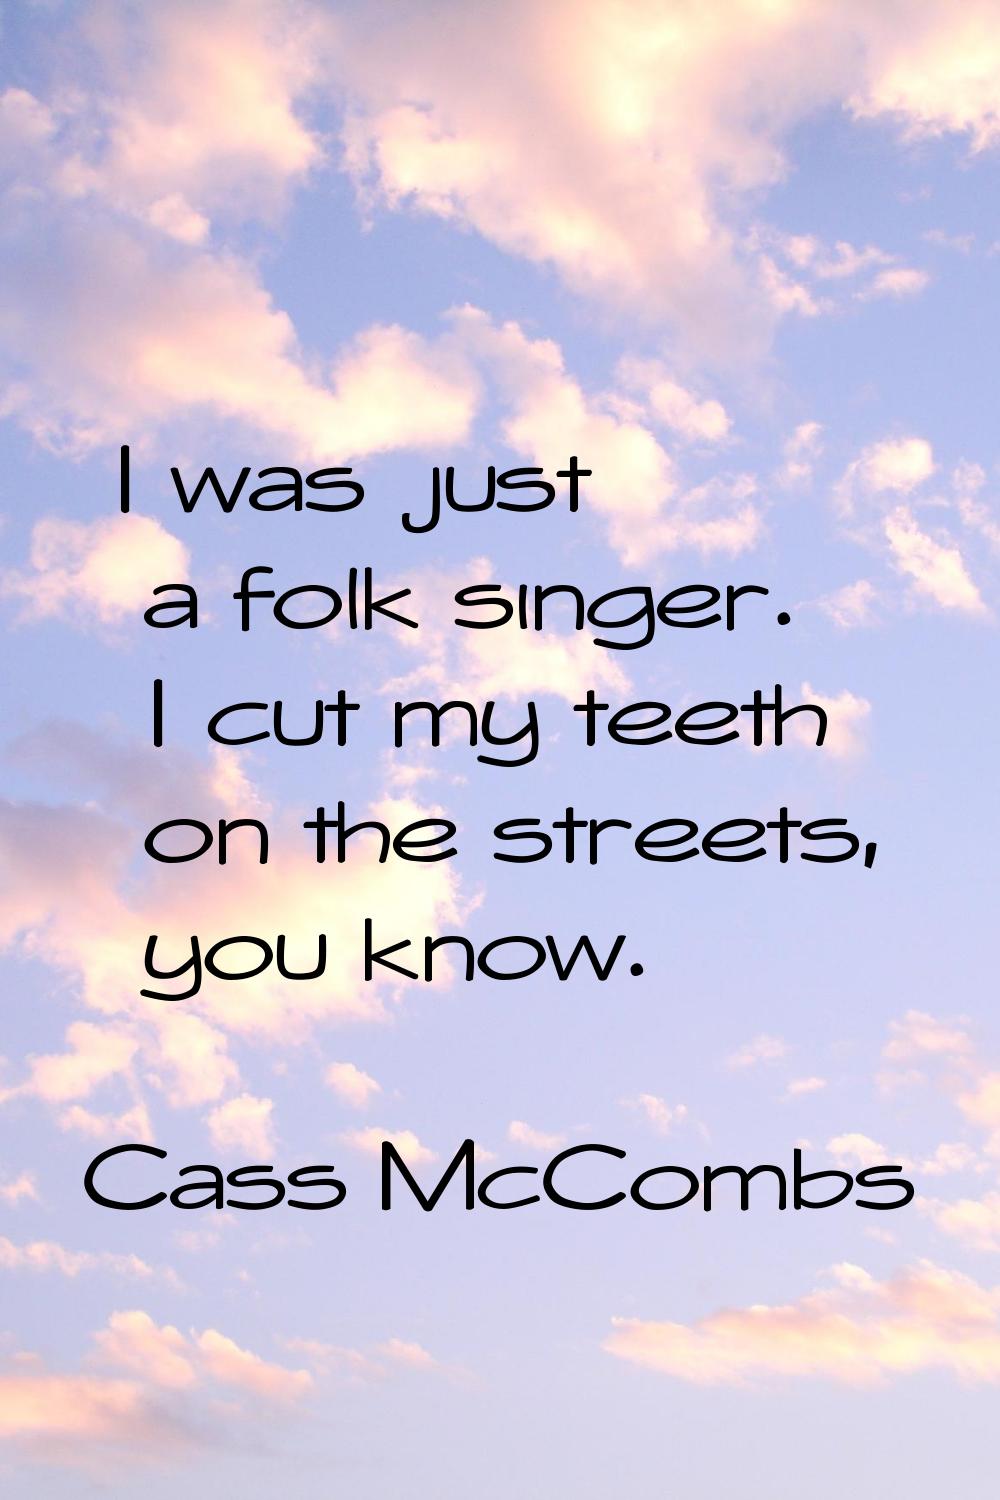 I was just a folk singer. I cut my teeth on the streets, you know.